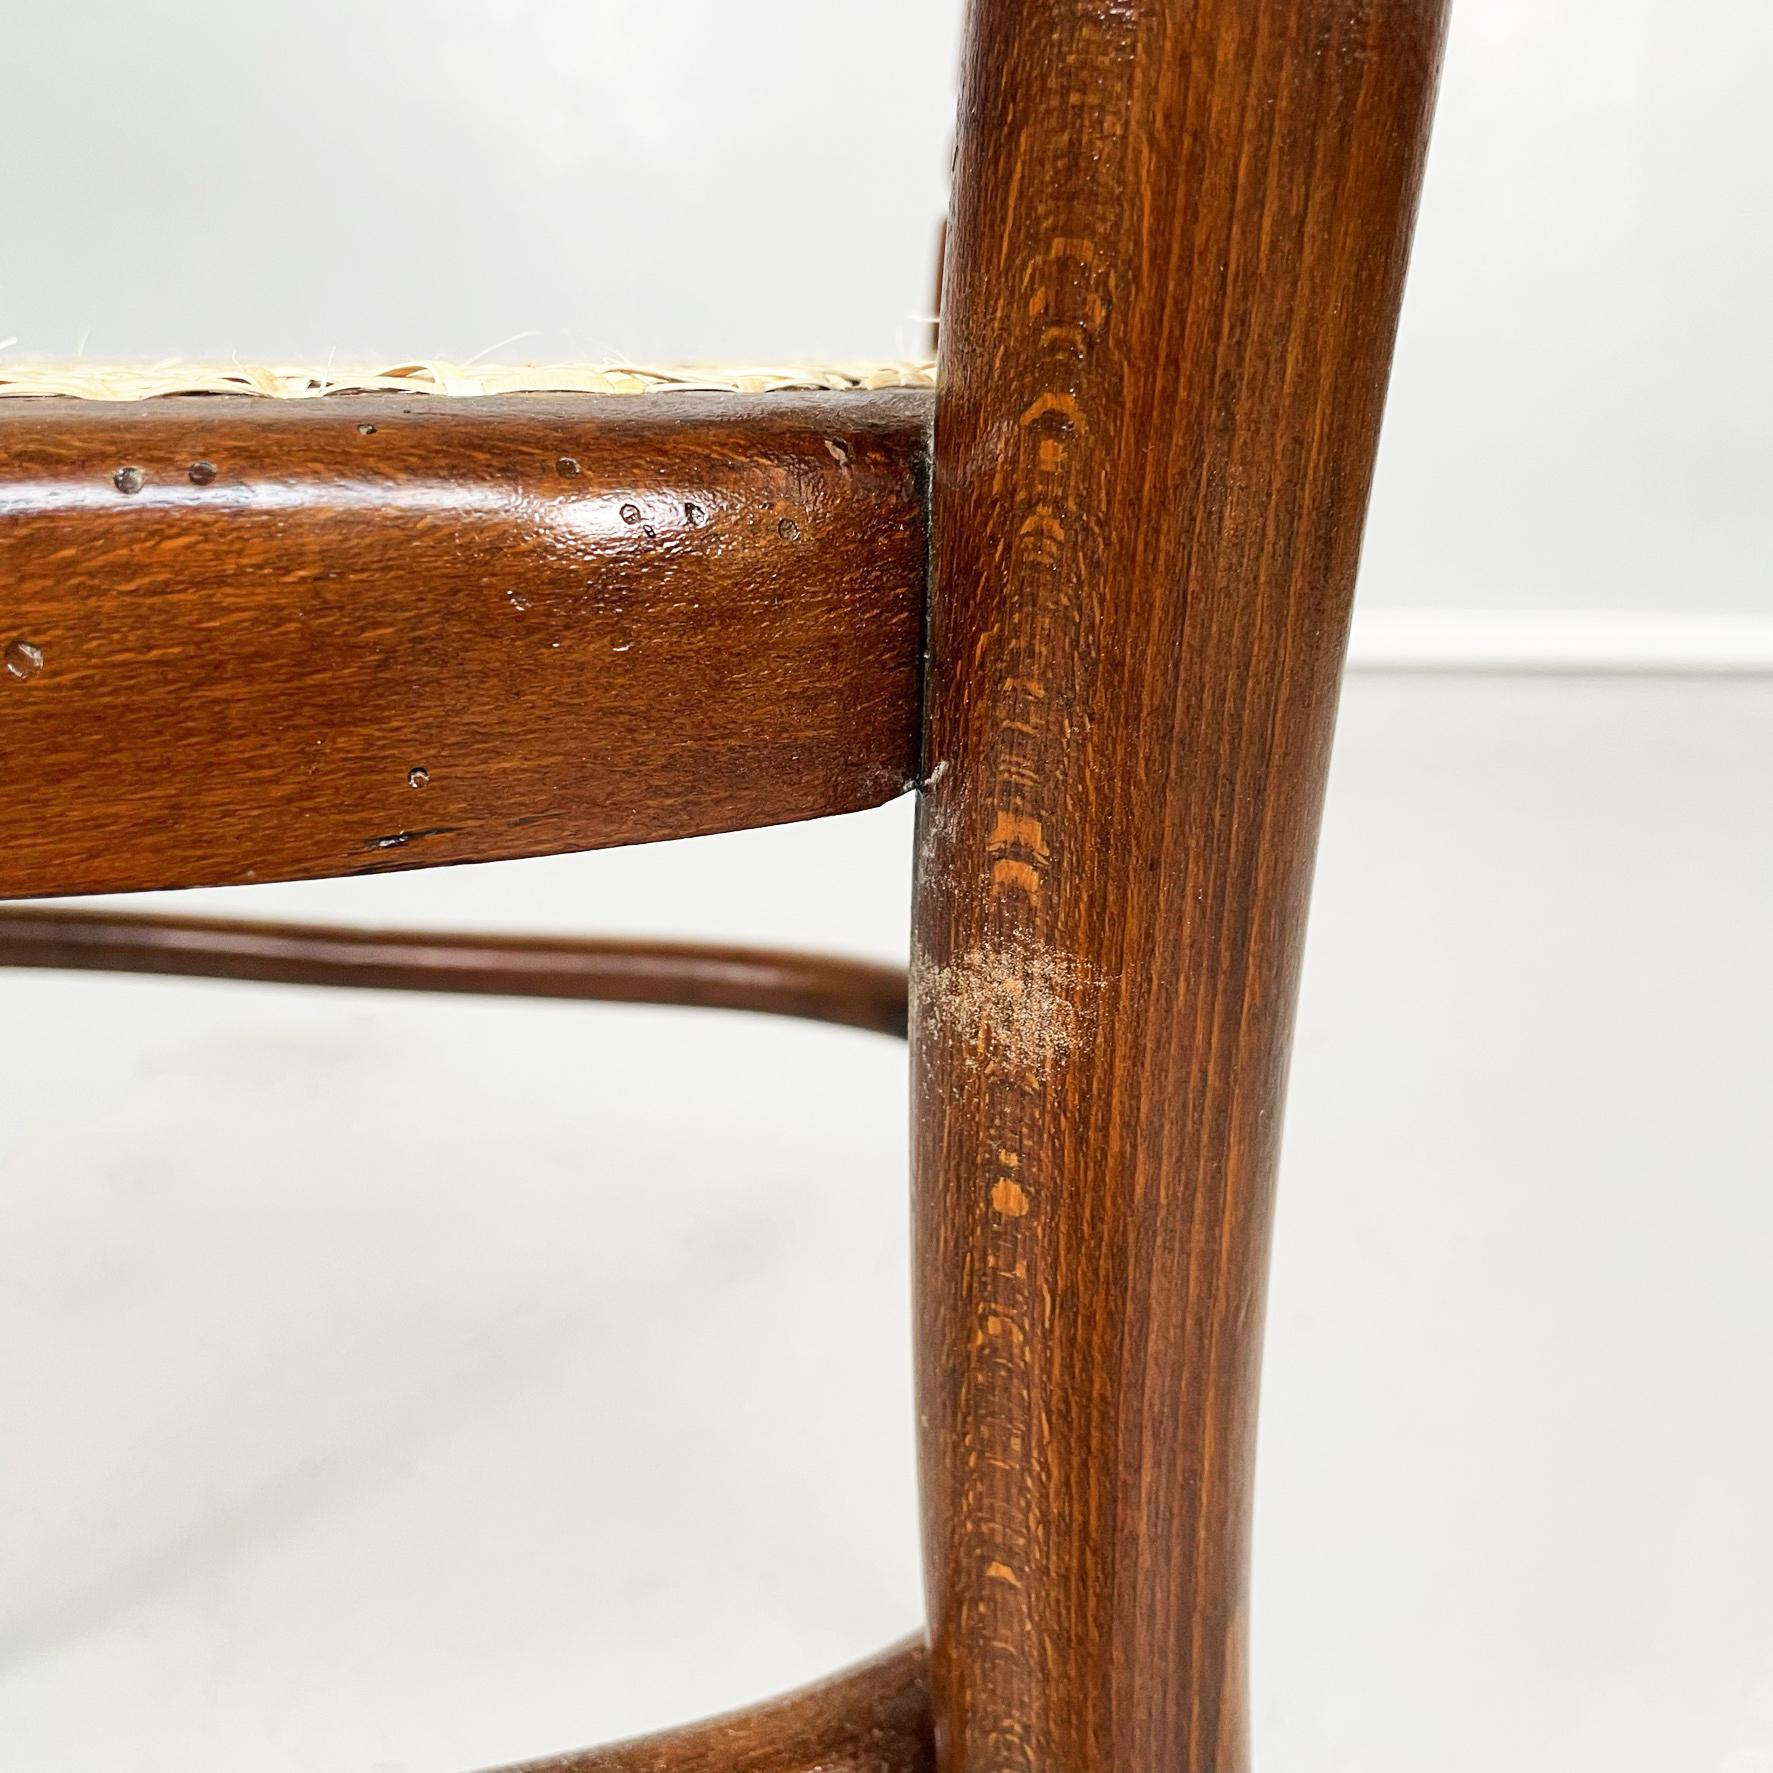 Austrian Chairs with Straw and Wood by Thonet, 1900s For Sale 8